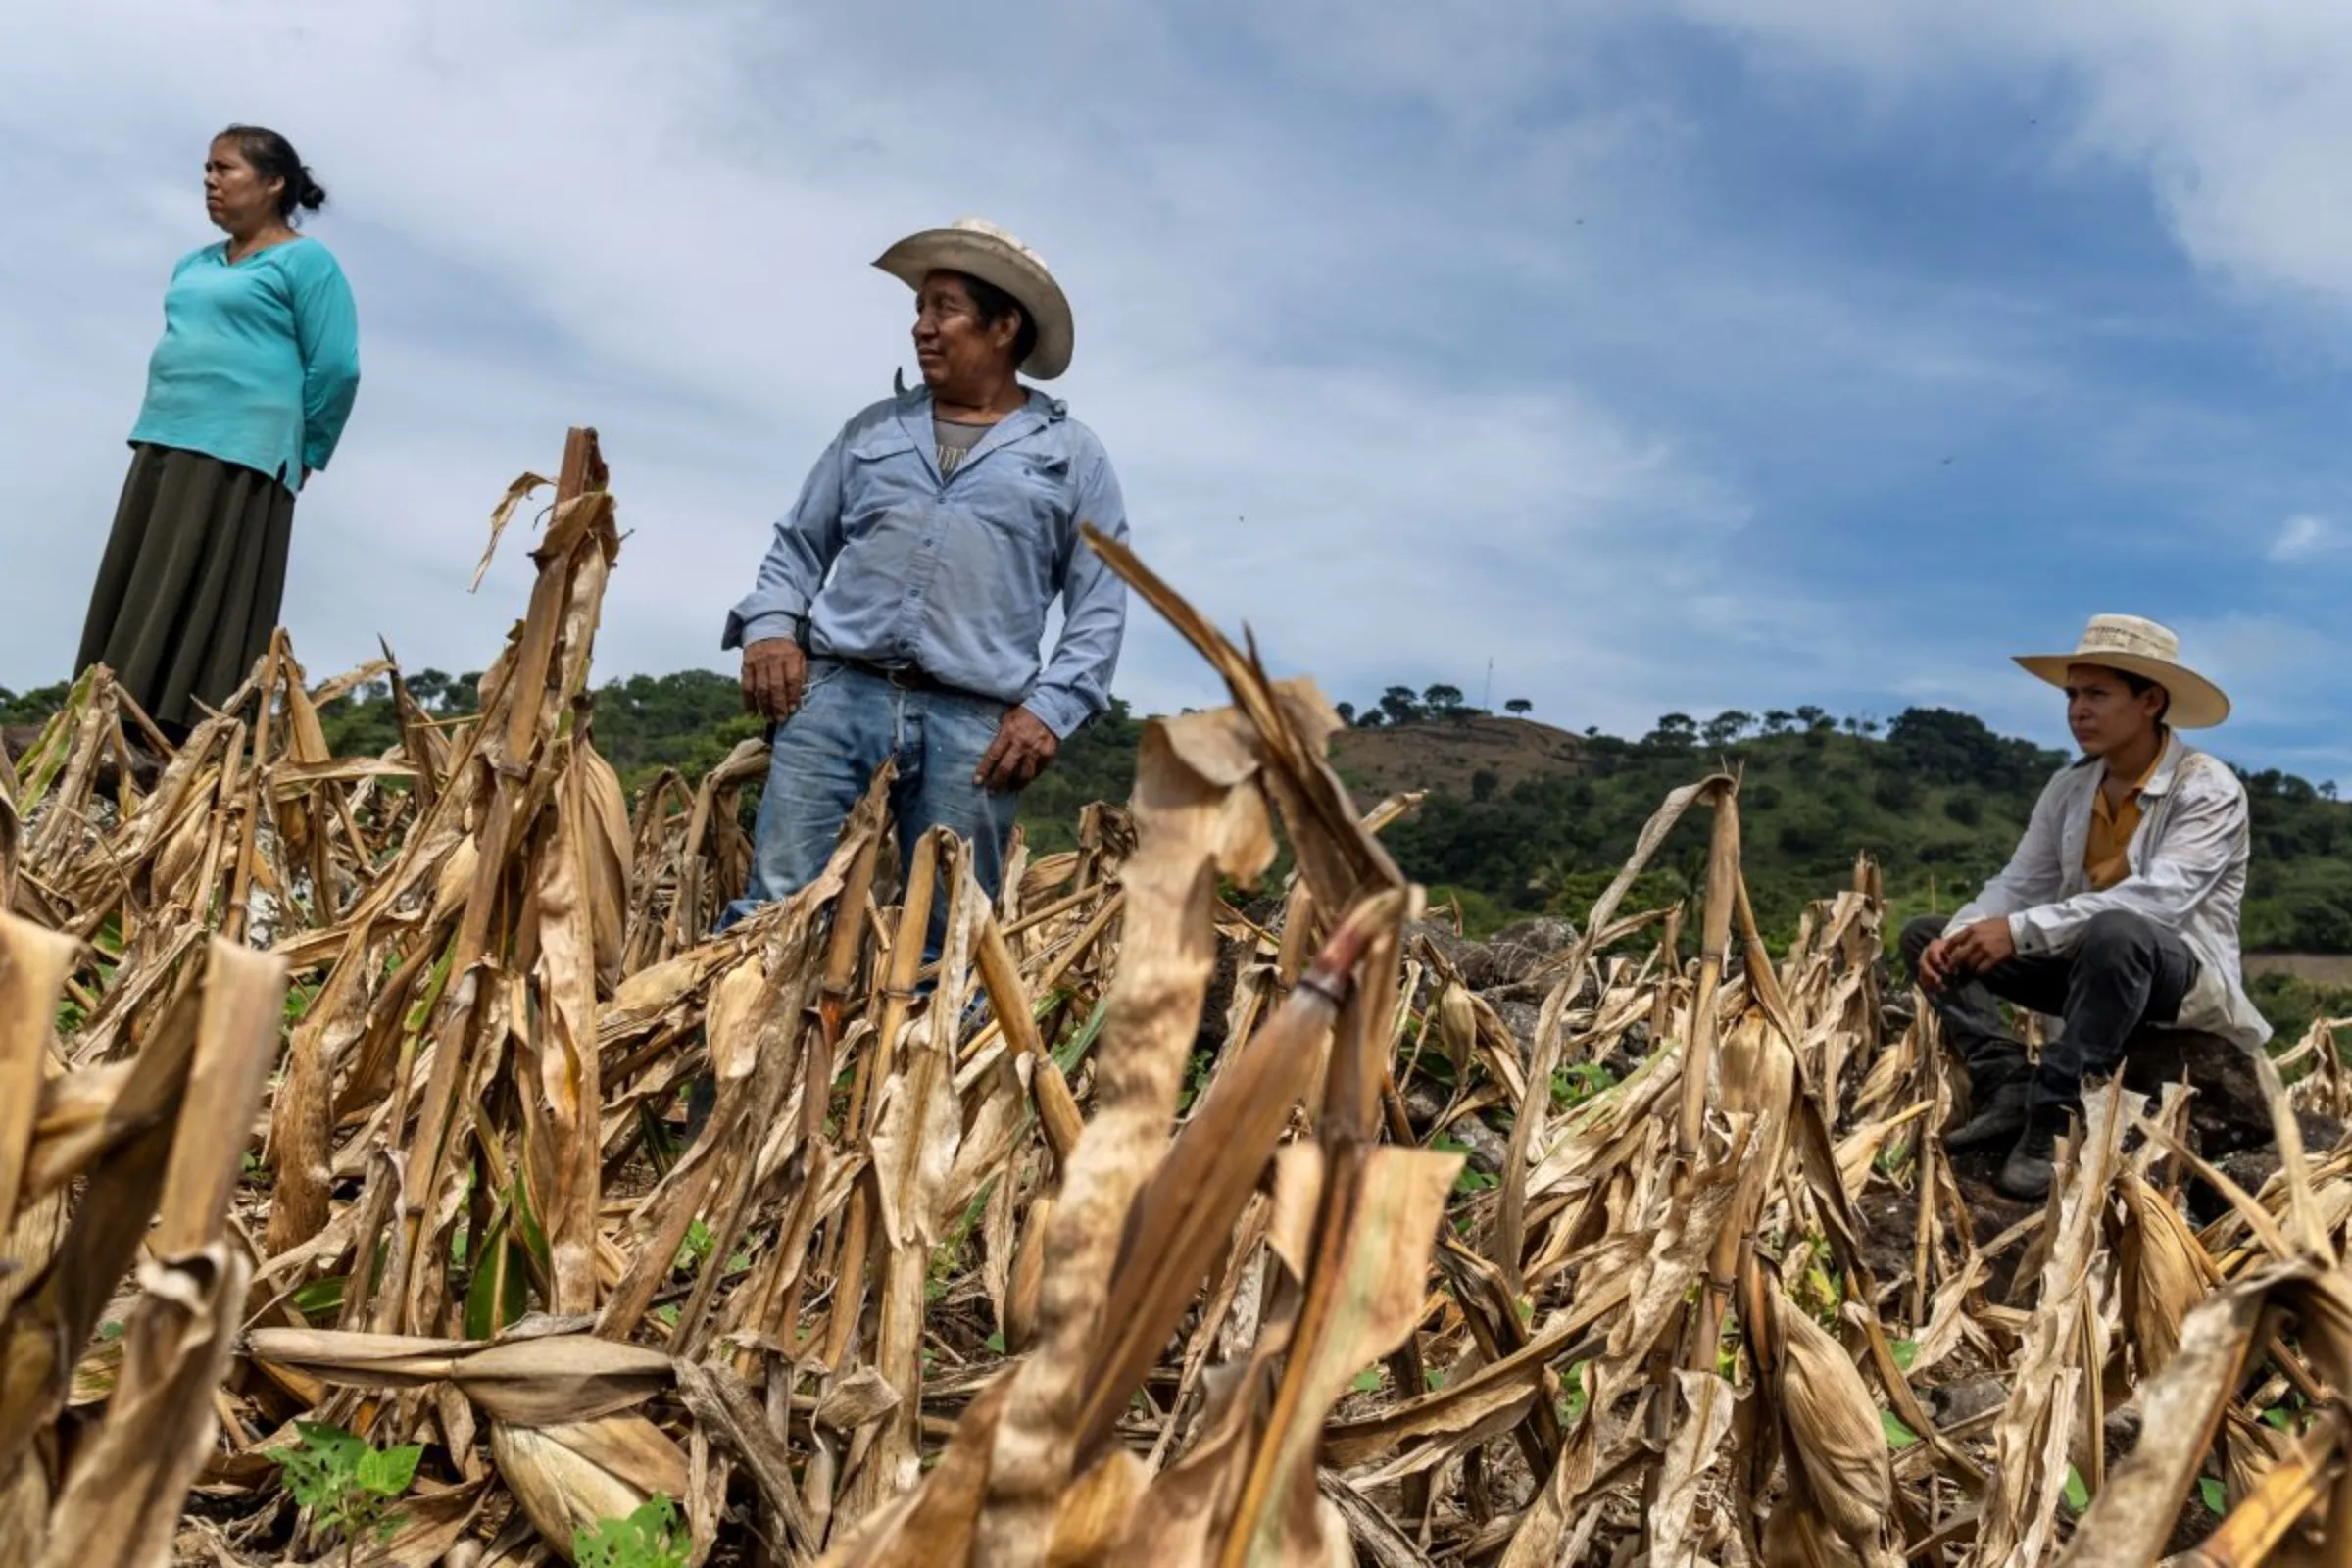 Bean farmer Amilcar Ramirez and his family stand in a field of maize and Chorti bean plants in the province of Chiquimula, Guatemala, September 6, 2023. Thomson Reuter Foundation/Fabio Cuttica